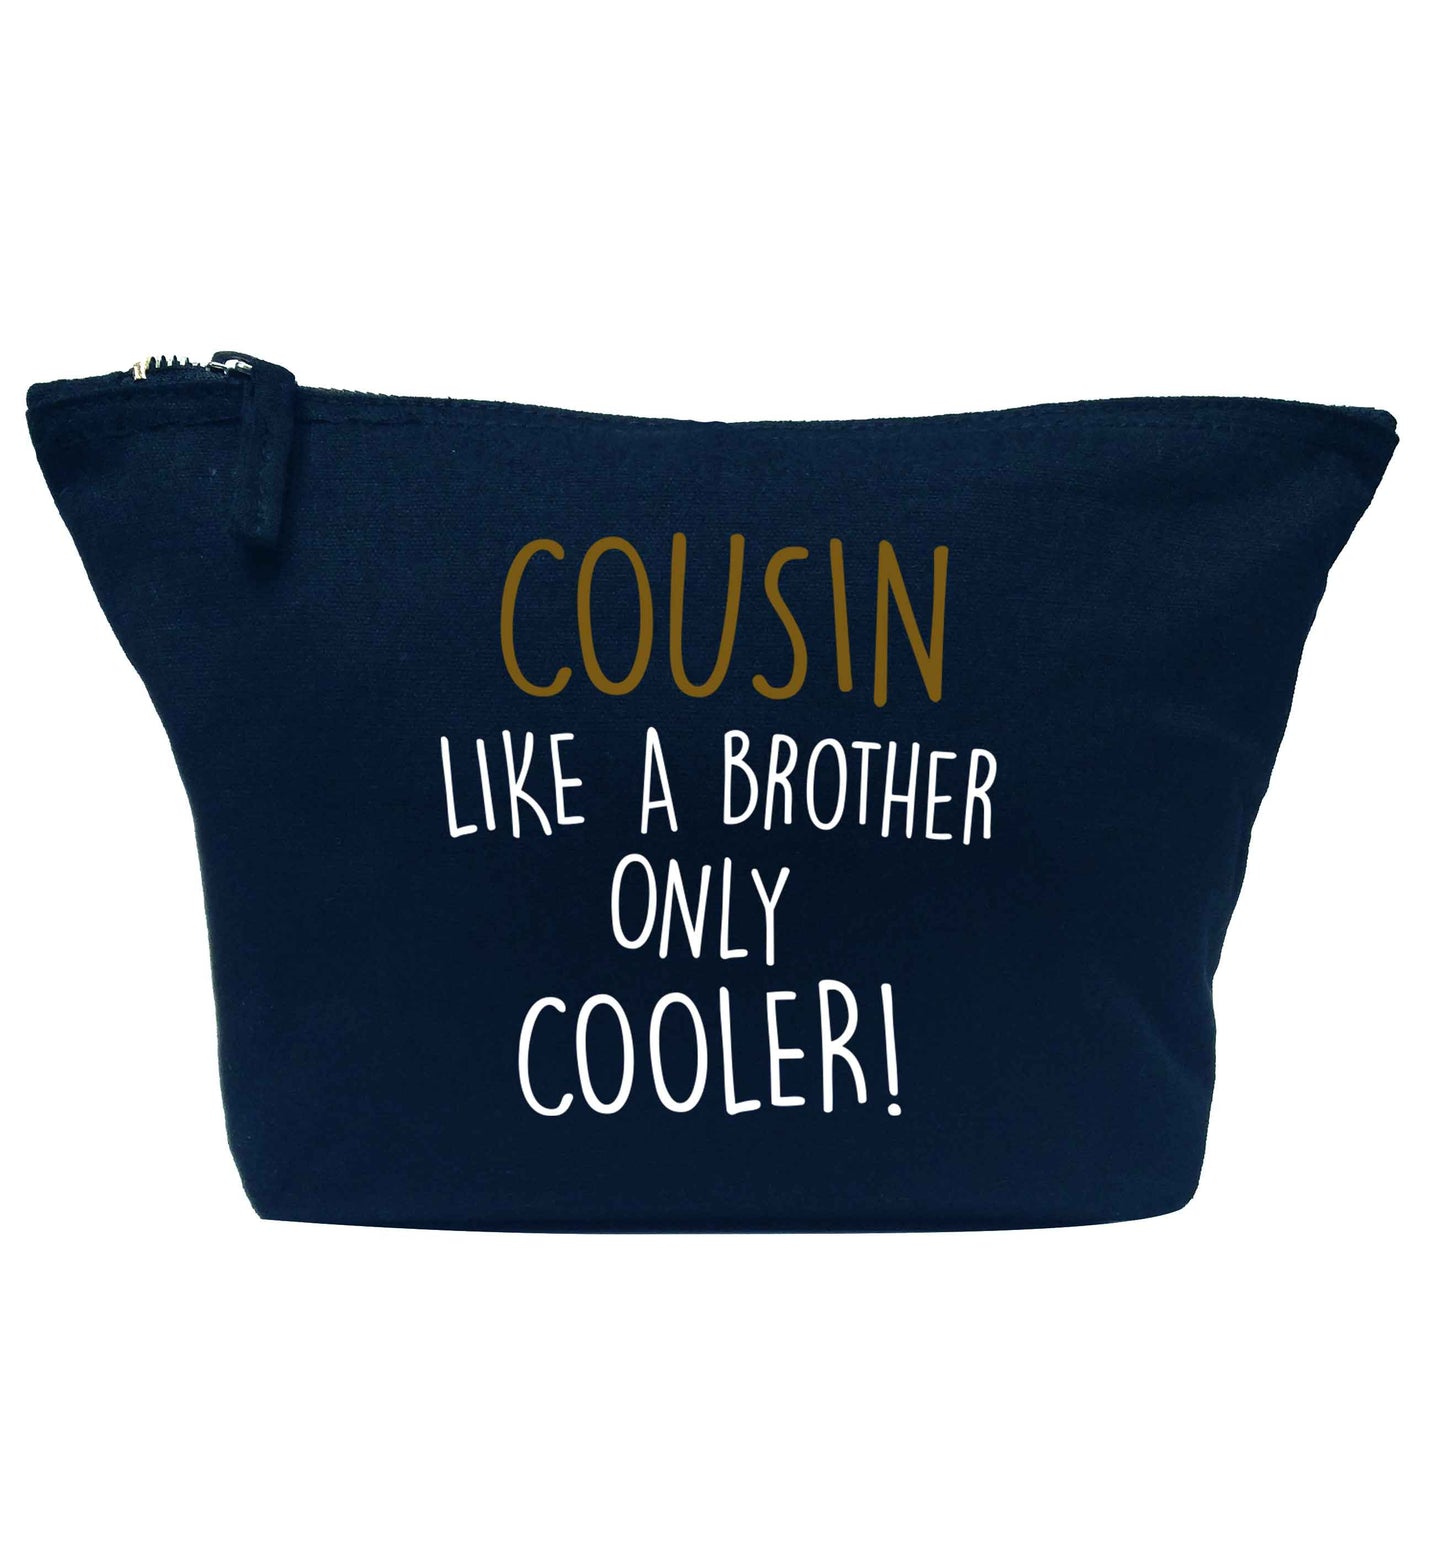 Cousin like a brother only cooler navy makeup bag